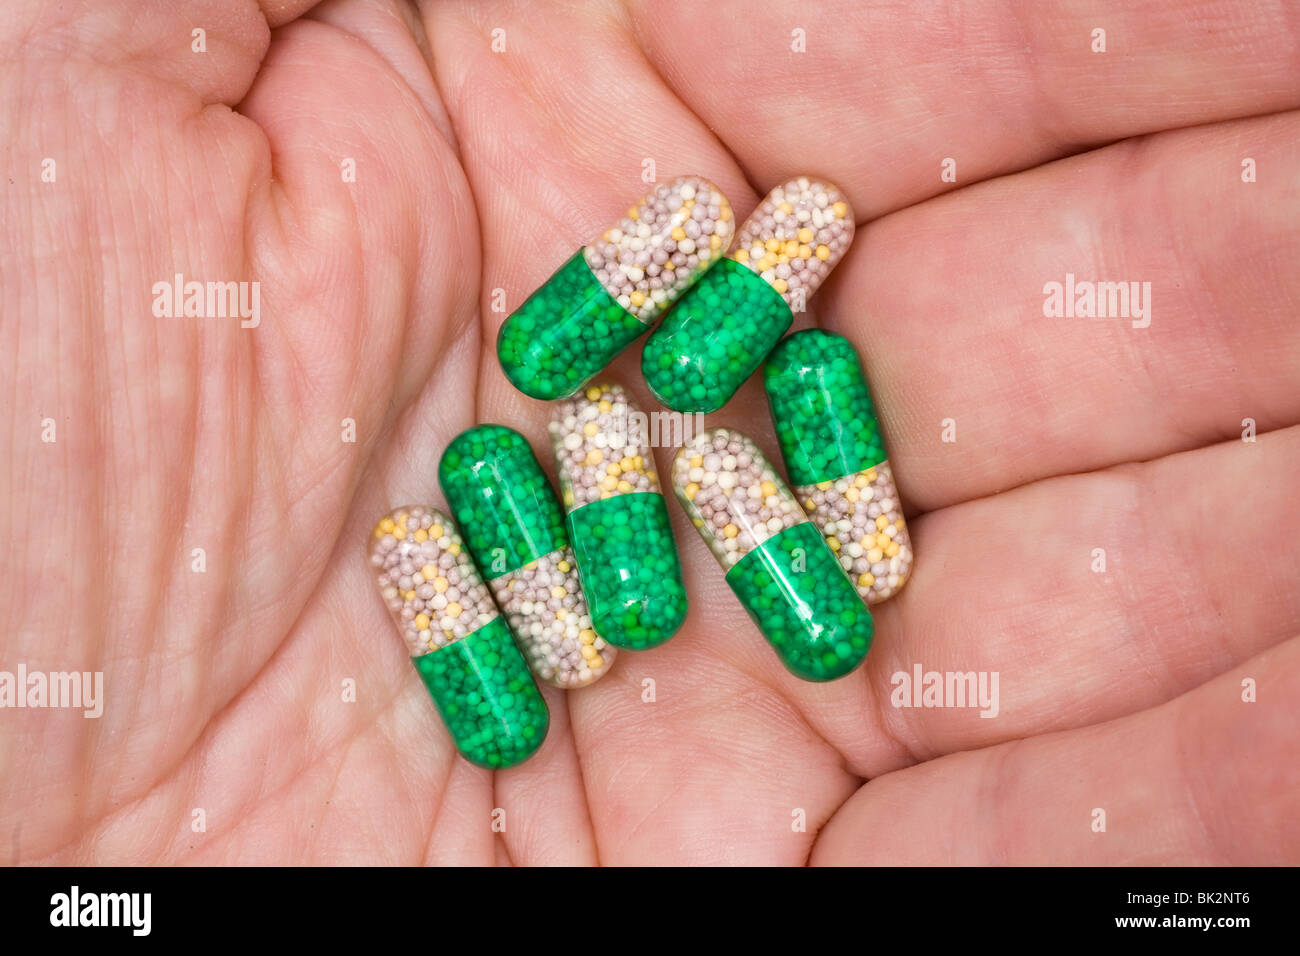 Hard-shelled medicinal capsules in the palm of a hand. Stock Photo